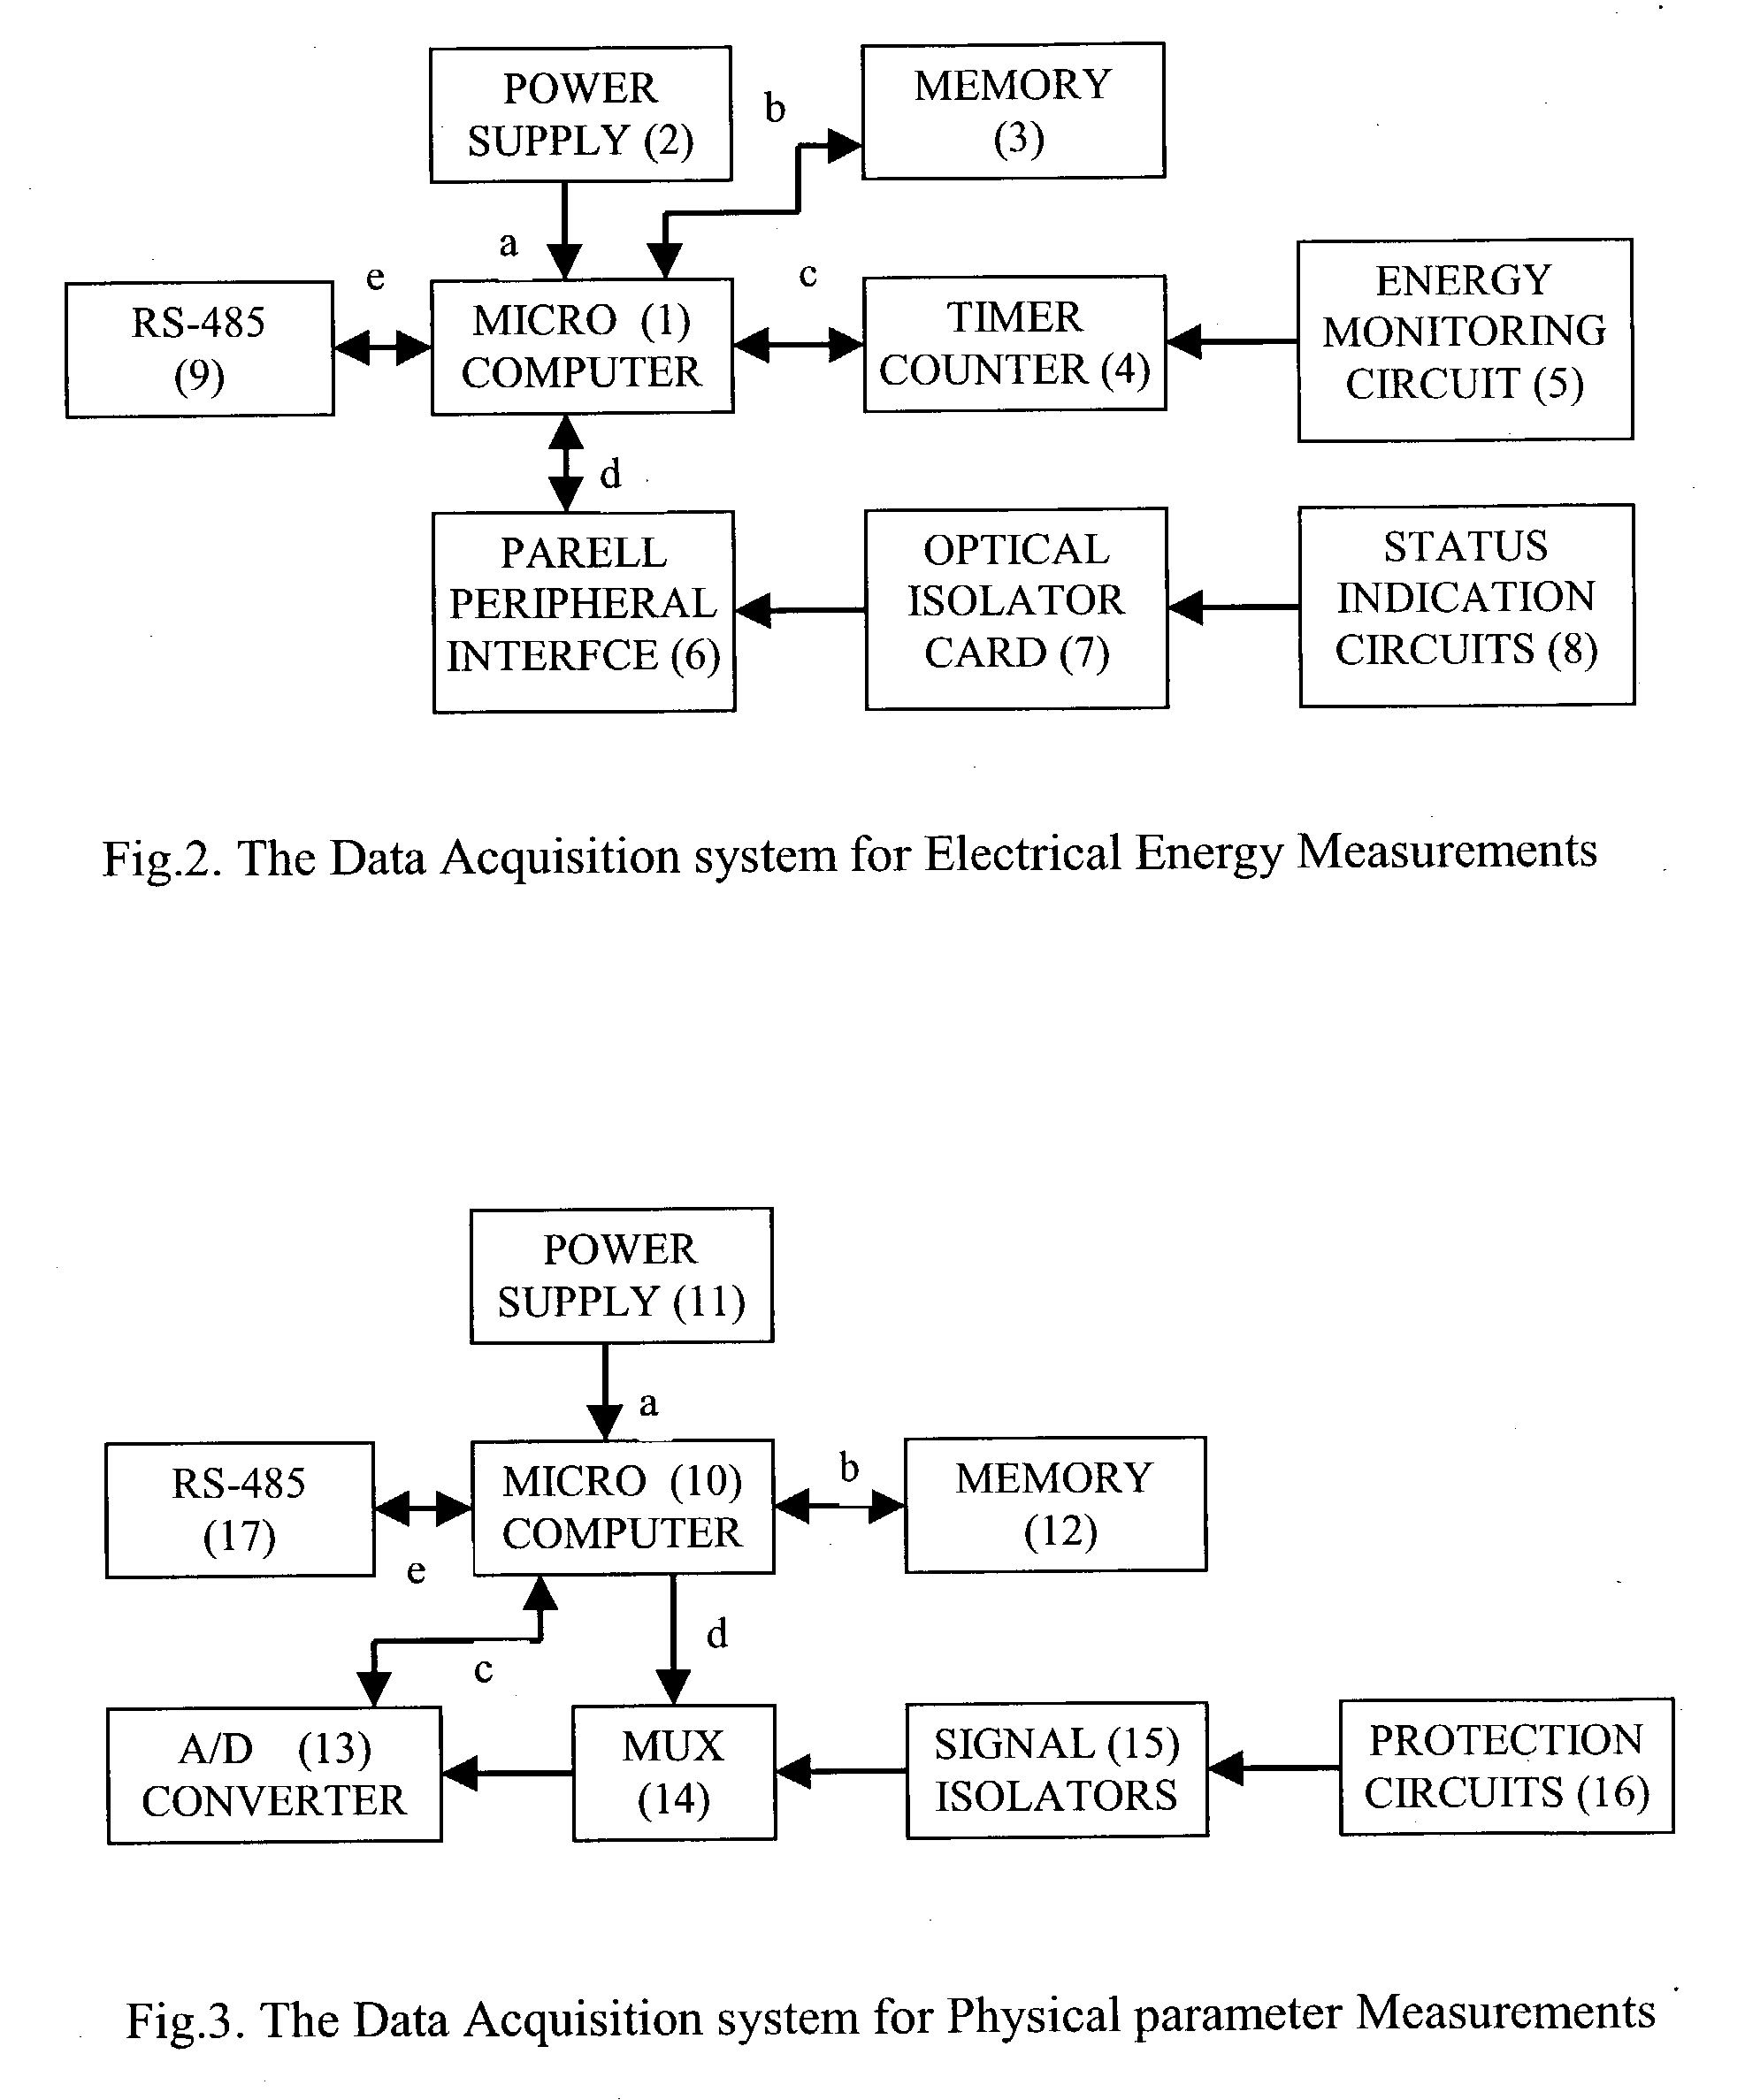 Energy efficient data acquisition system and a computer controlled on-line energy monitoring system incorporating the same